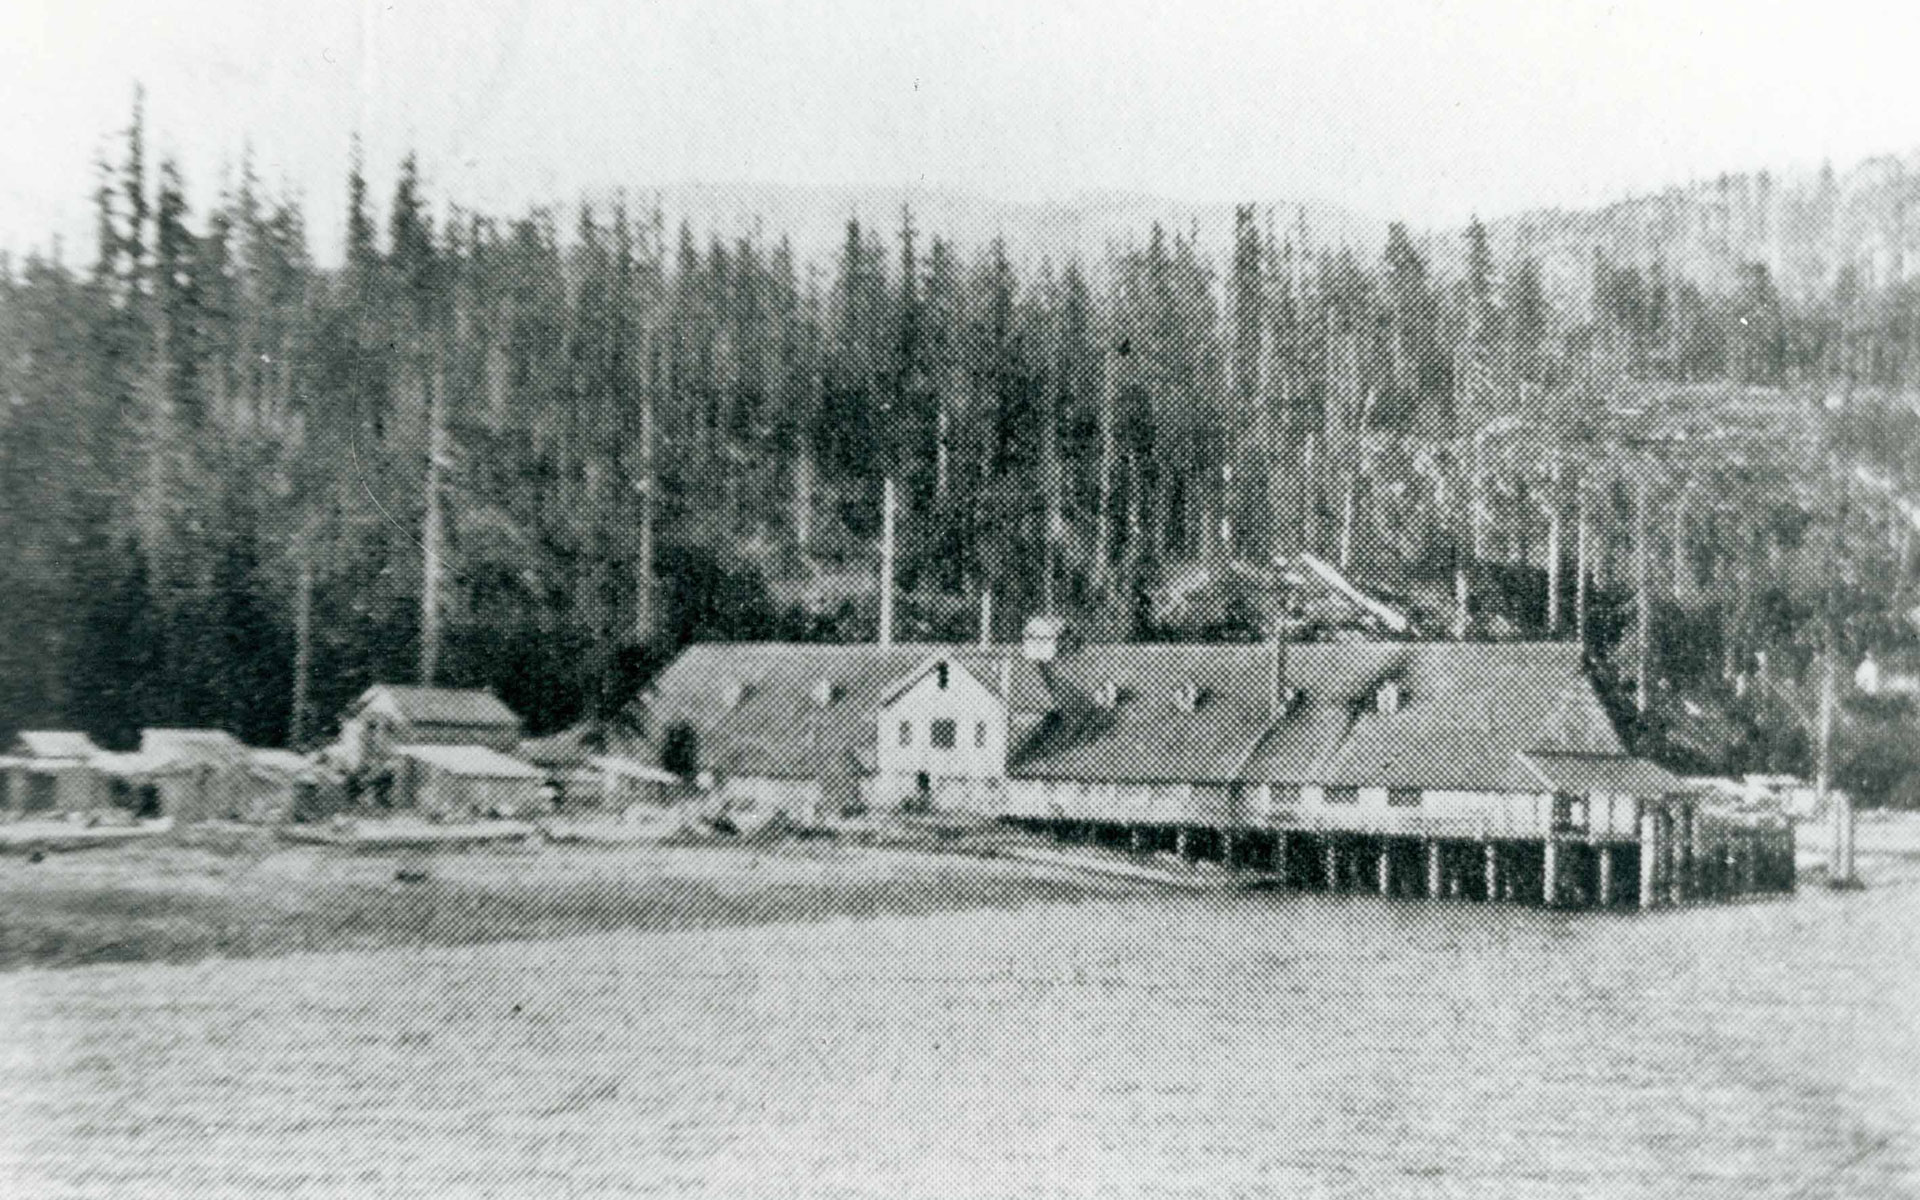 Cannery buildings on the shore viewed from the water.